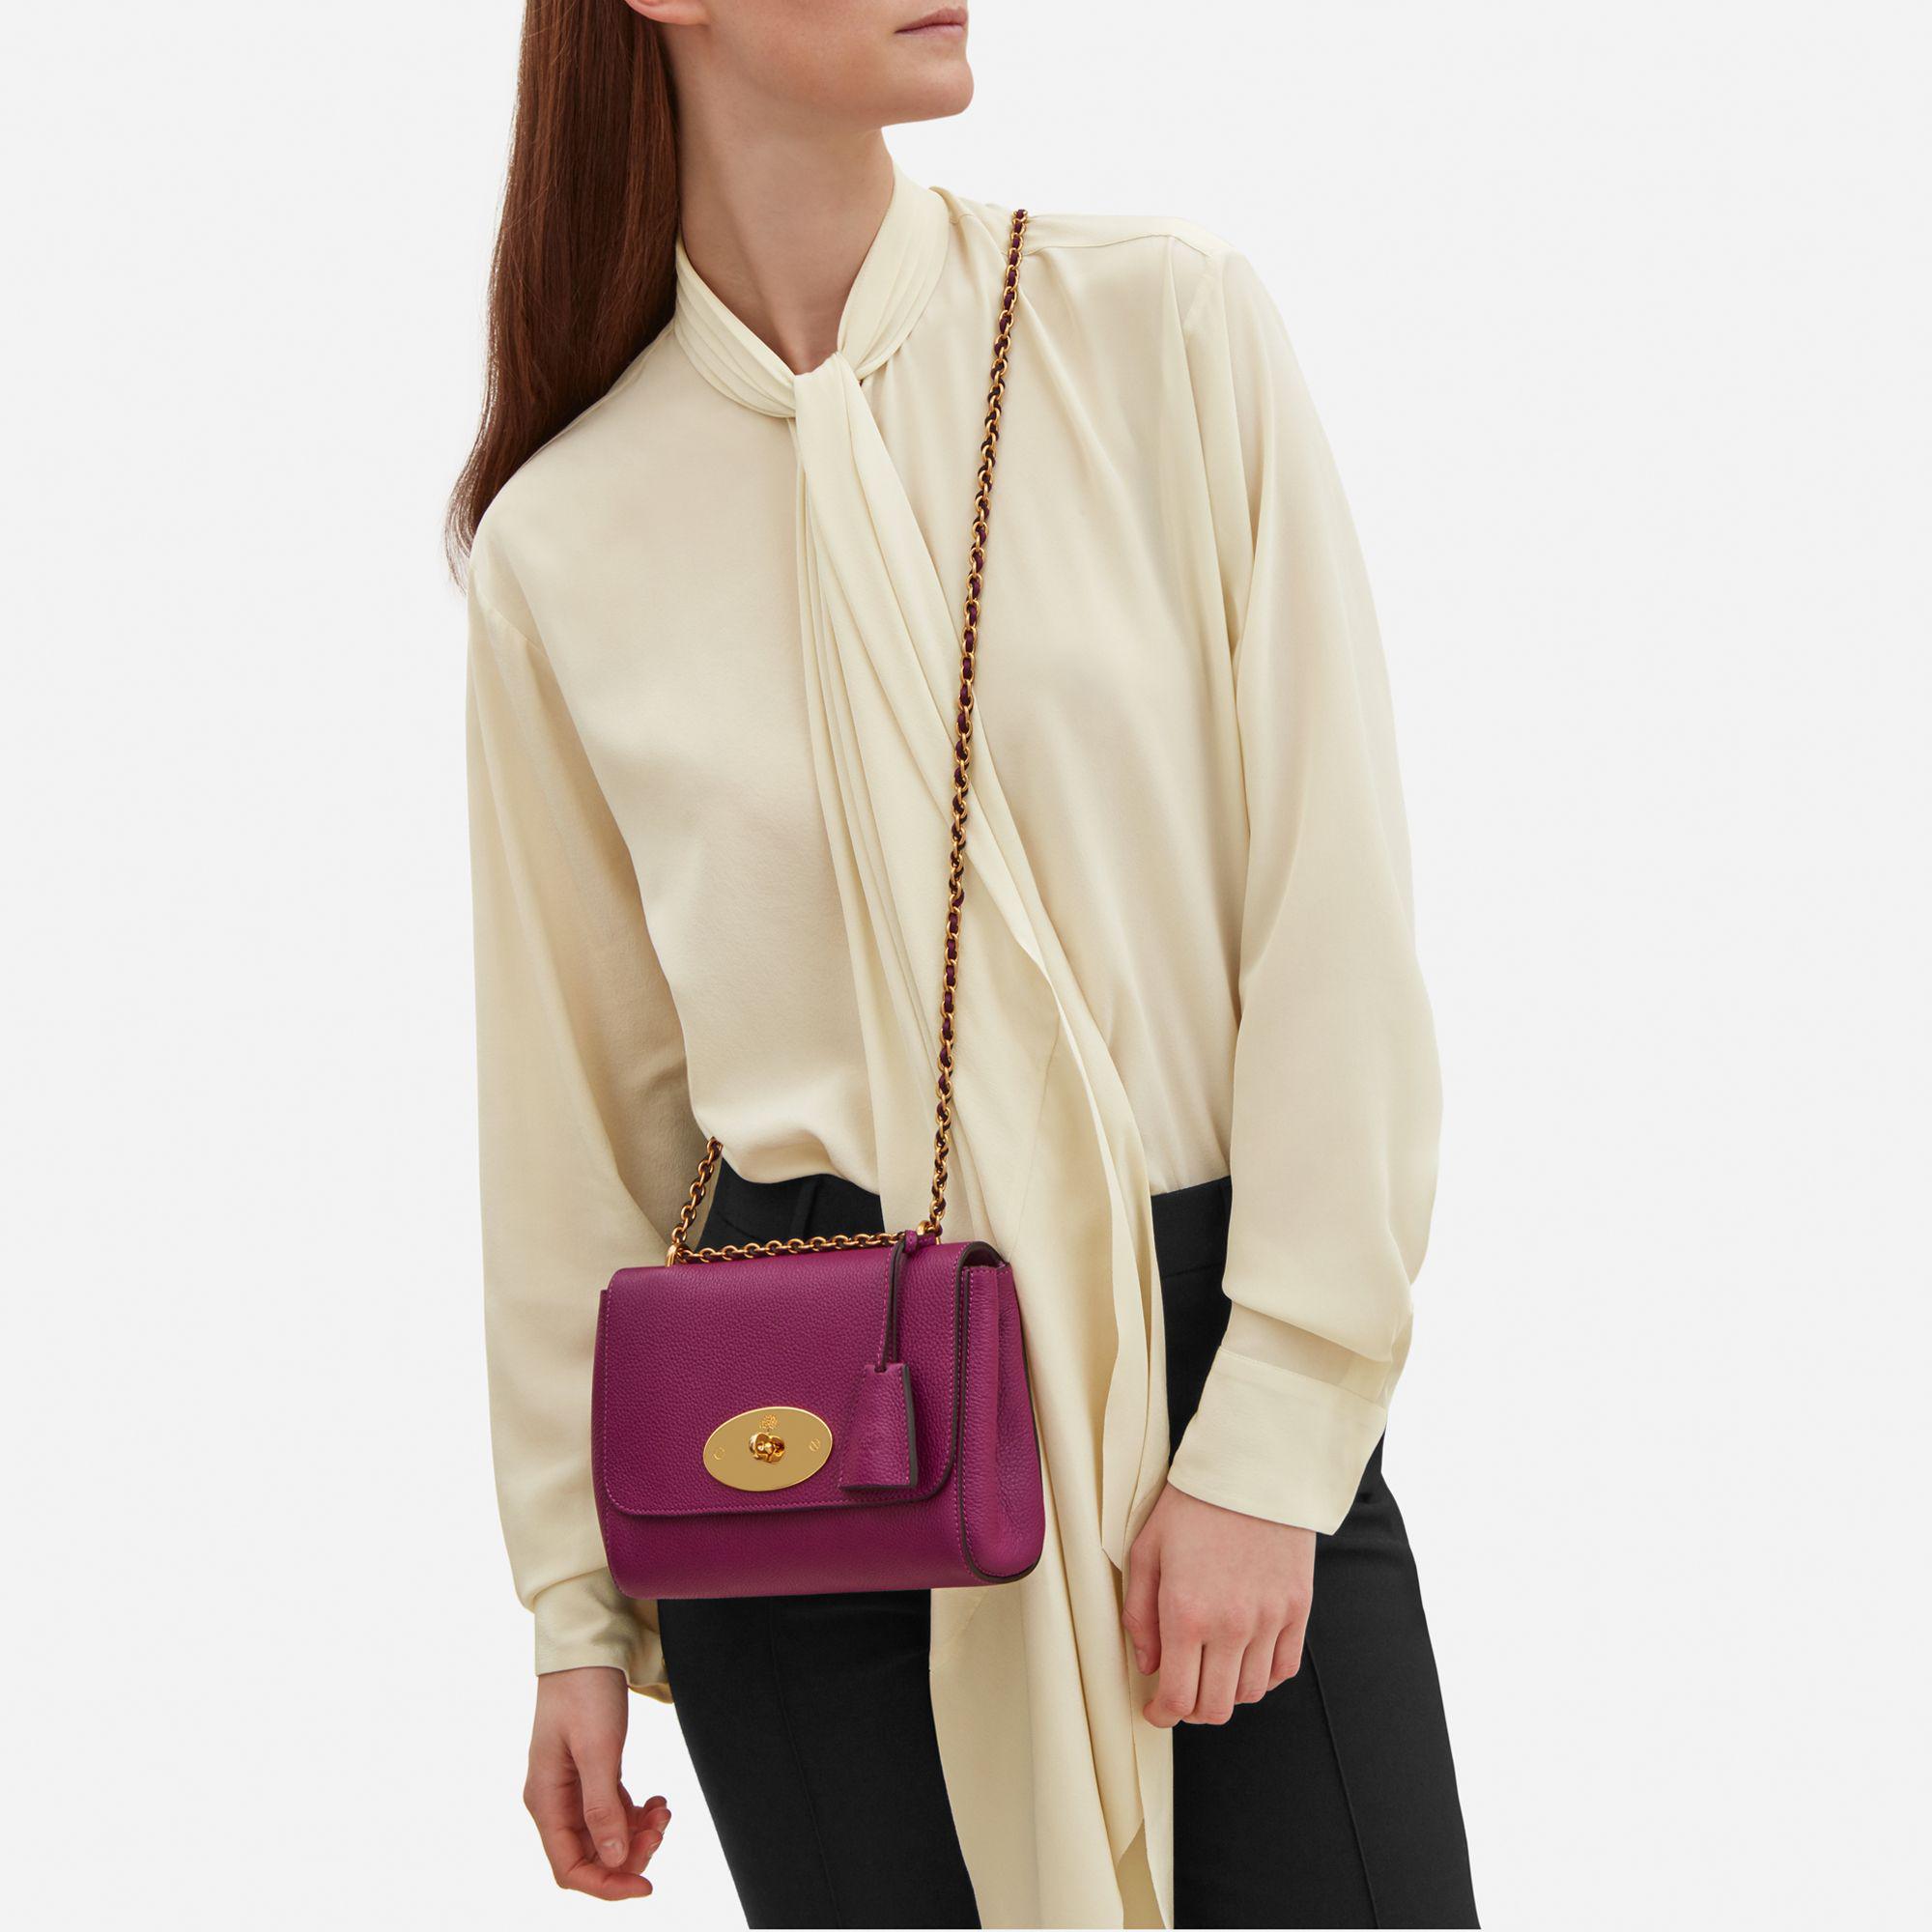 Lyst - Mulberry Lily Shoulder Bag in Purple